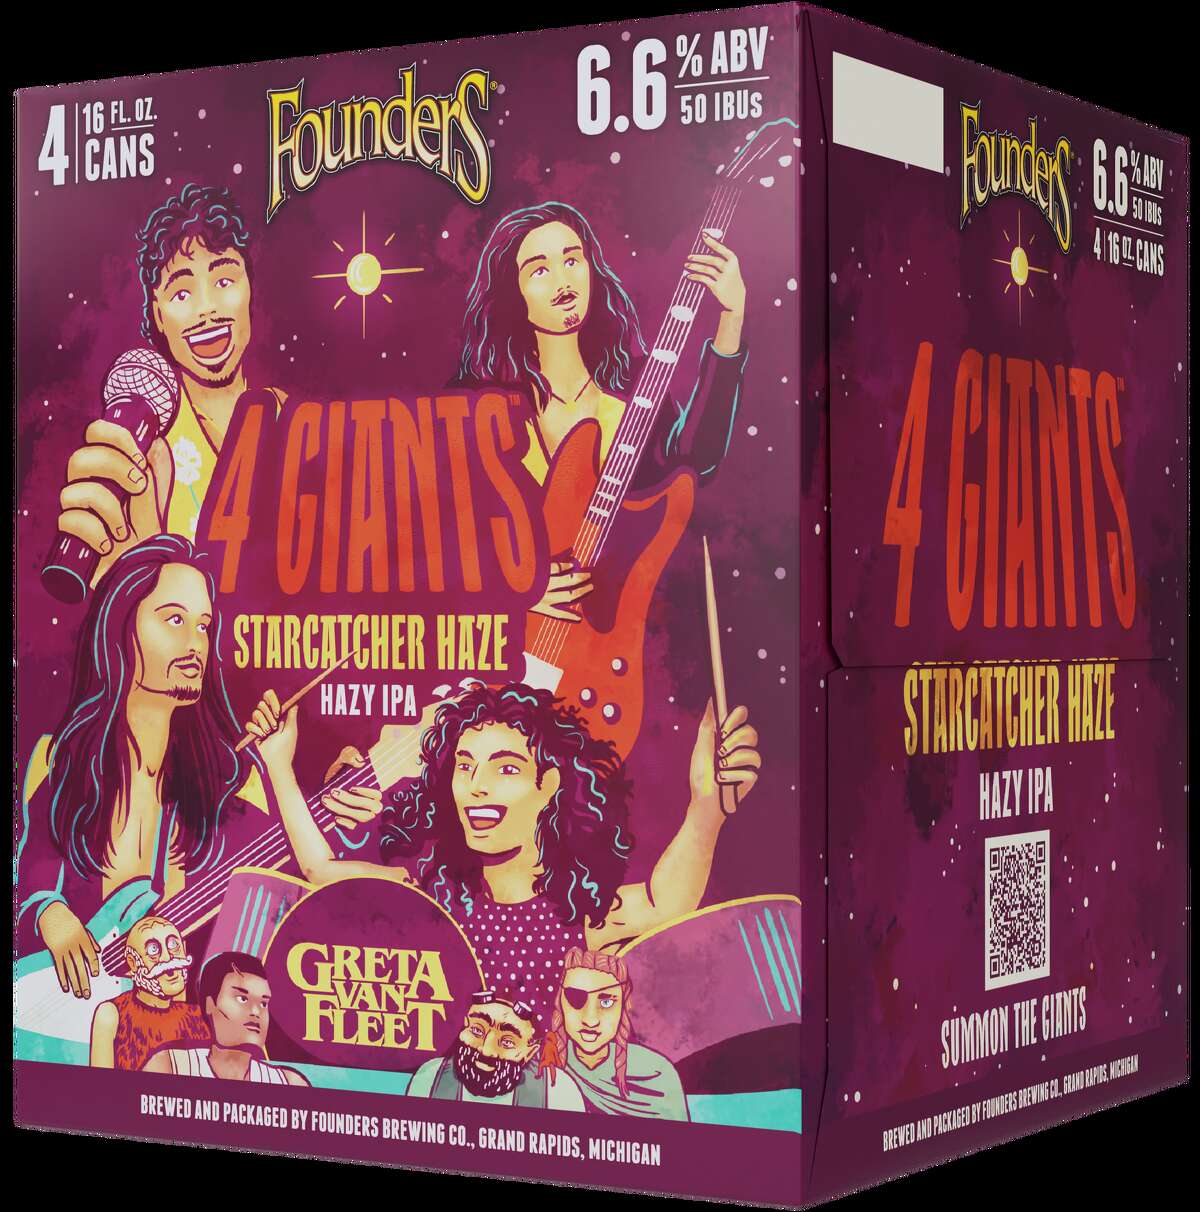 Greta Van Fleet has joined forces with Founders Brewing Company to produce a limited edition beer, 4 Giants Starcatcher Haze IPA, available July 21.